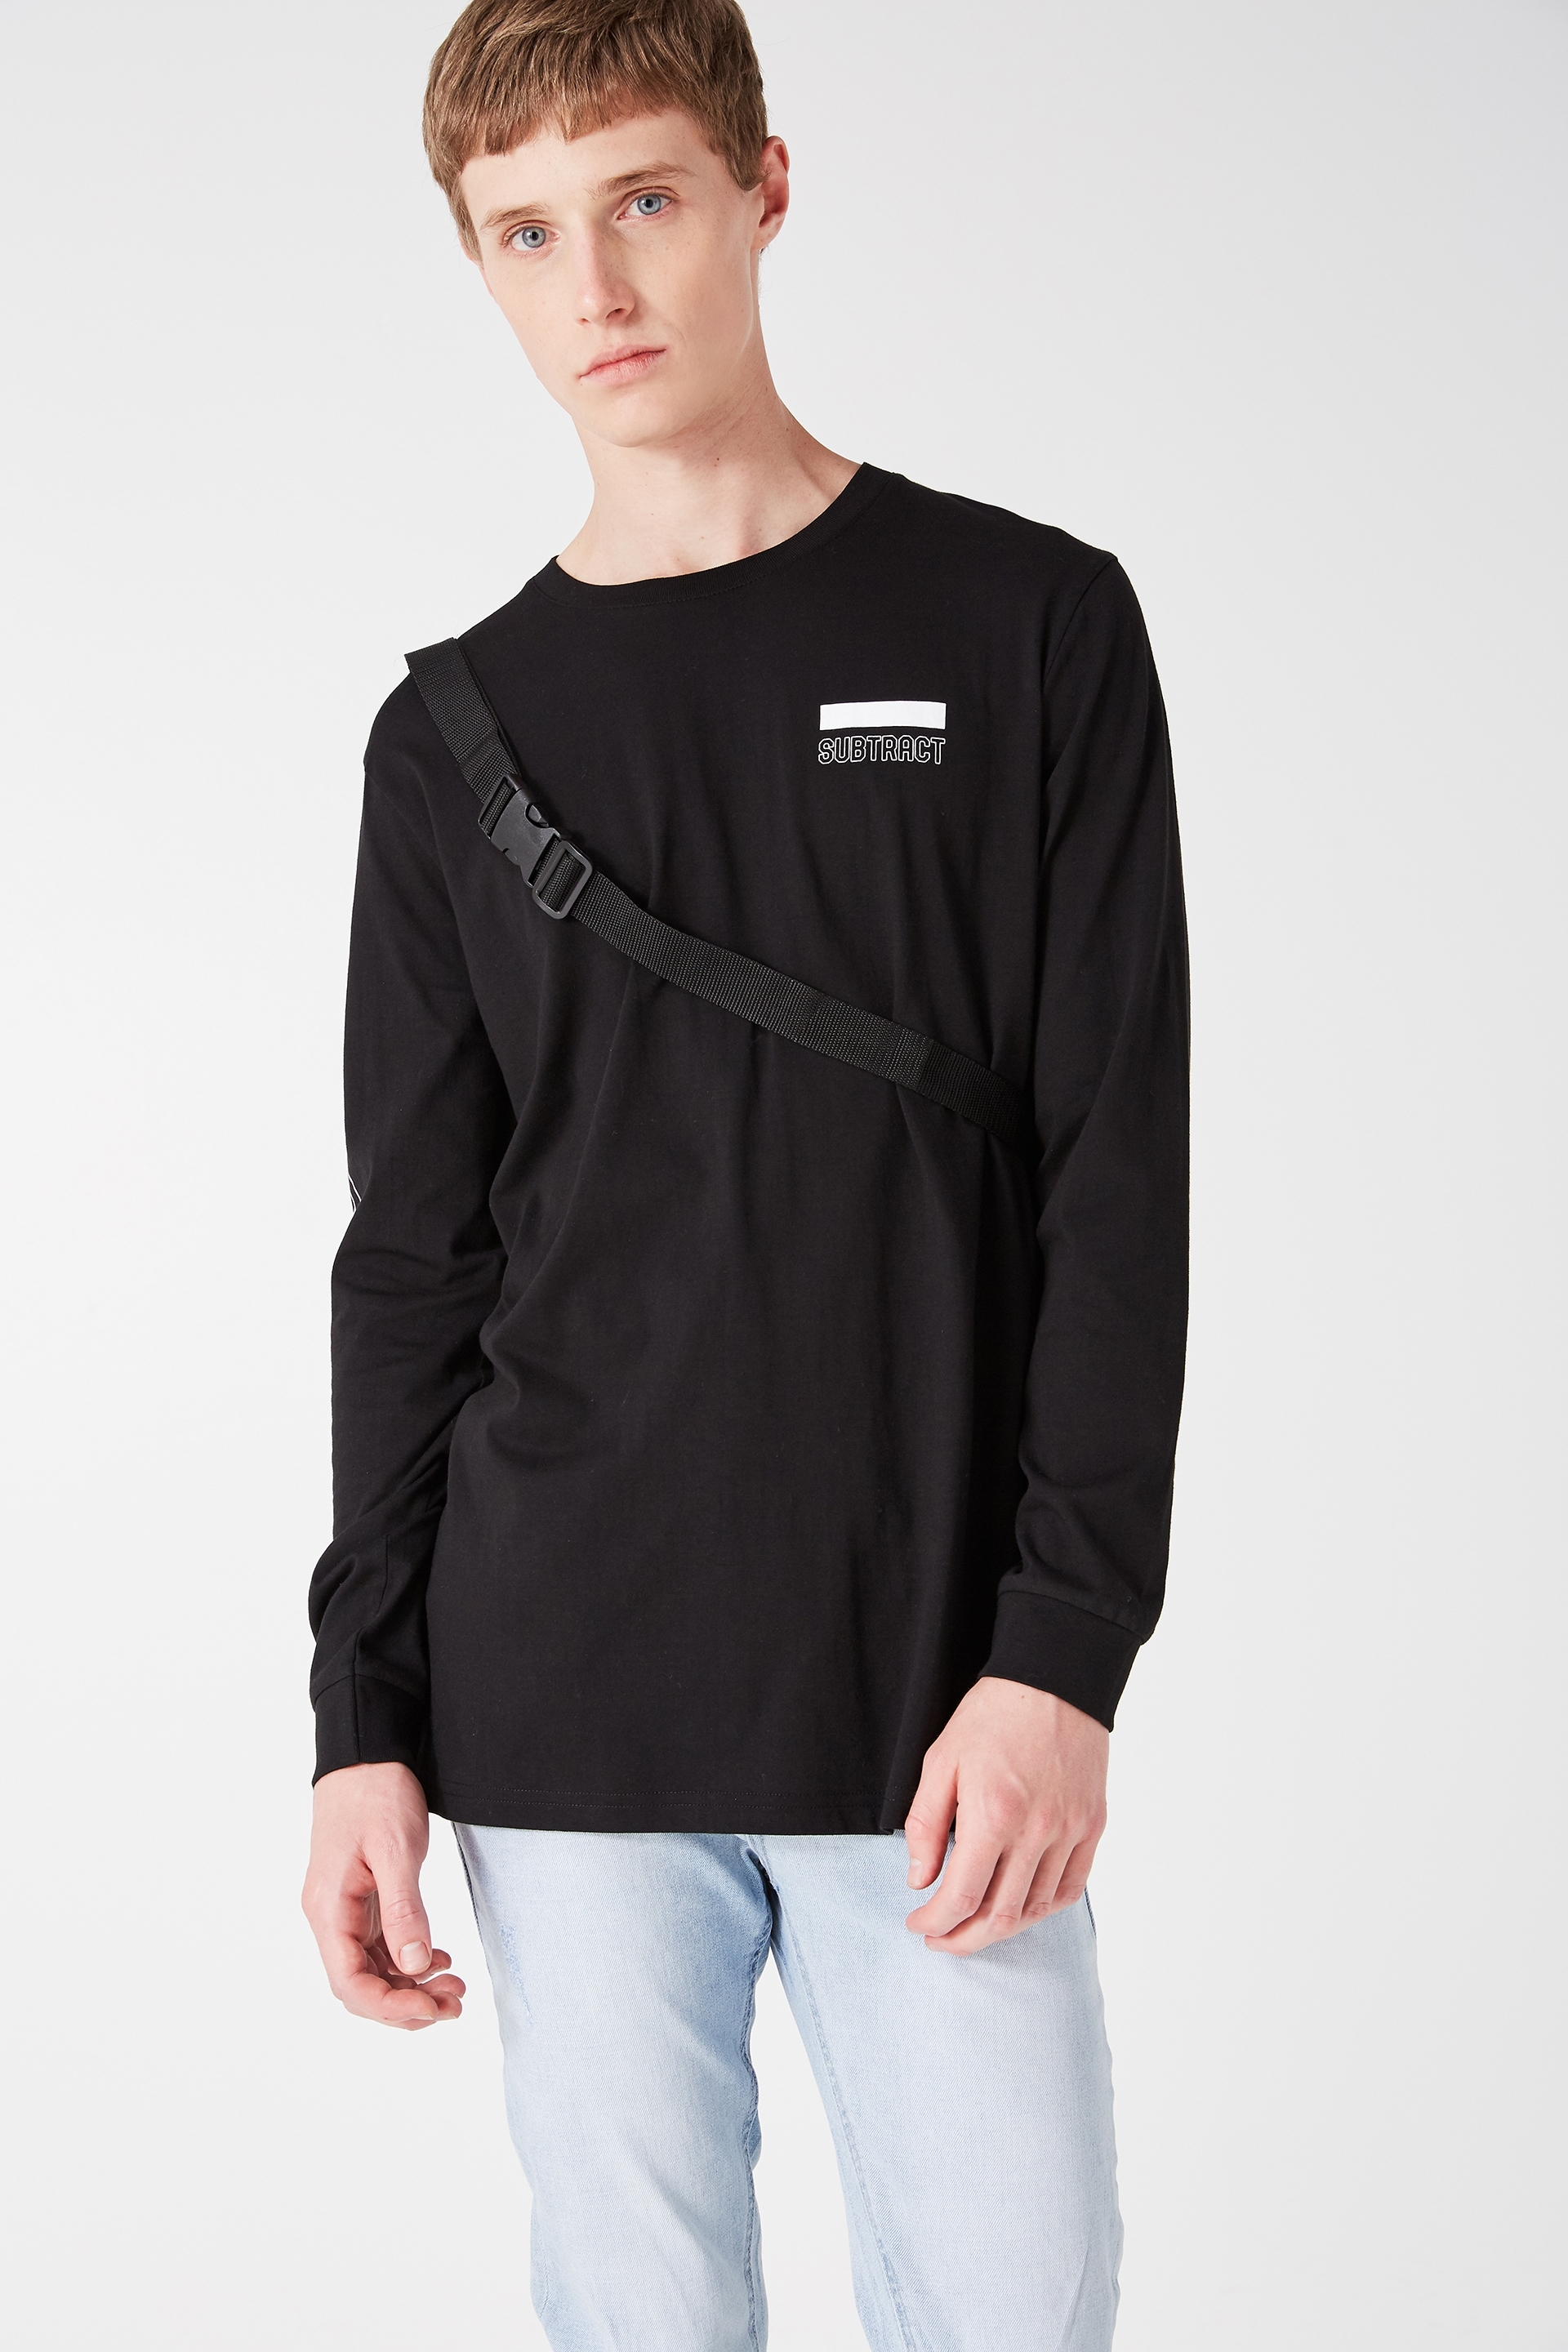 Factorie - Ls Amped Tall Tee - Black/subtract